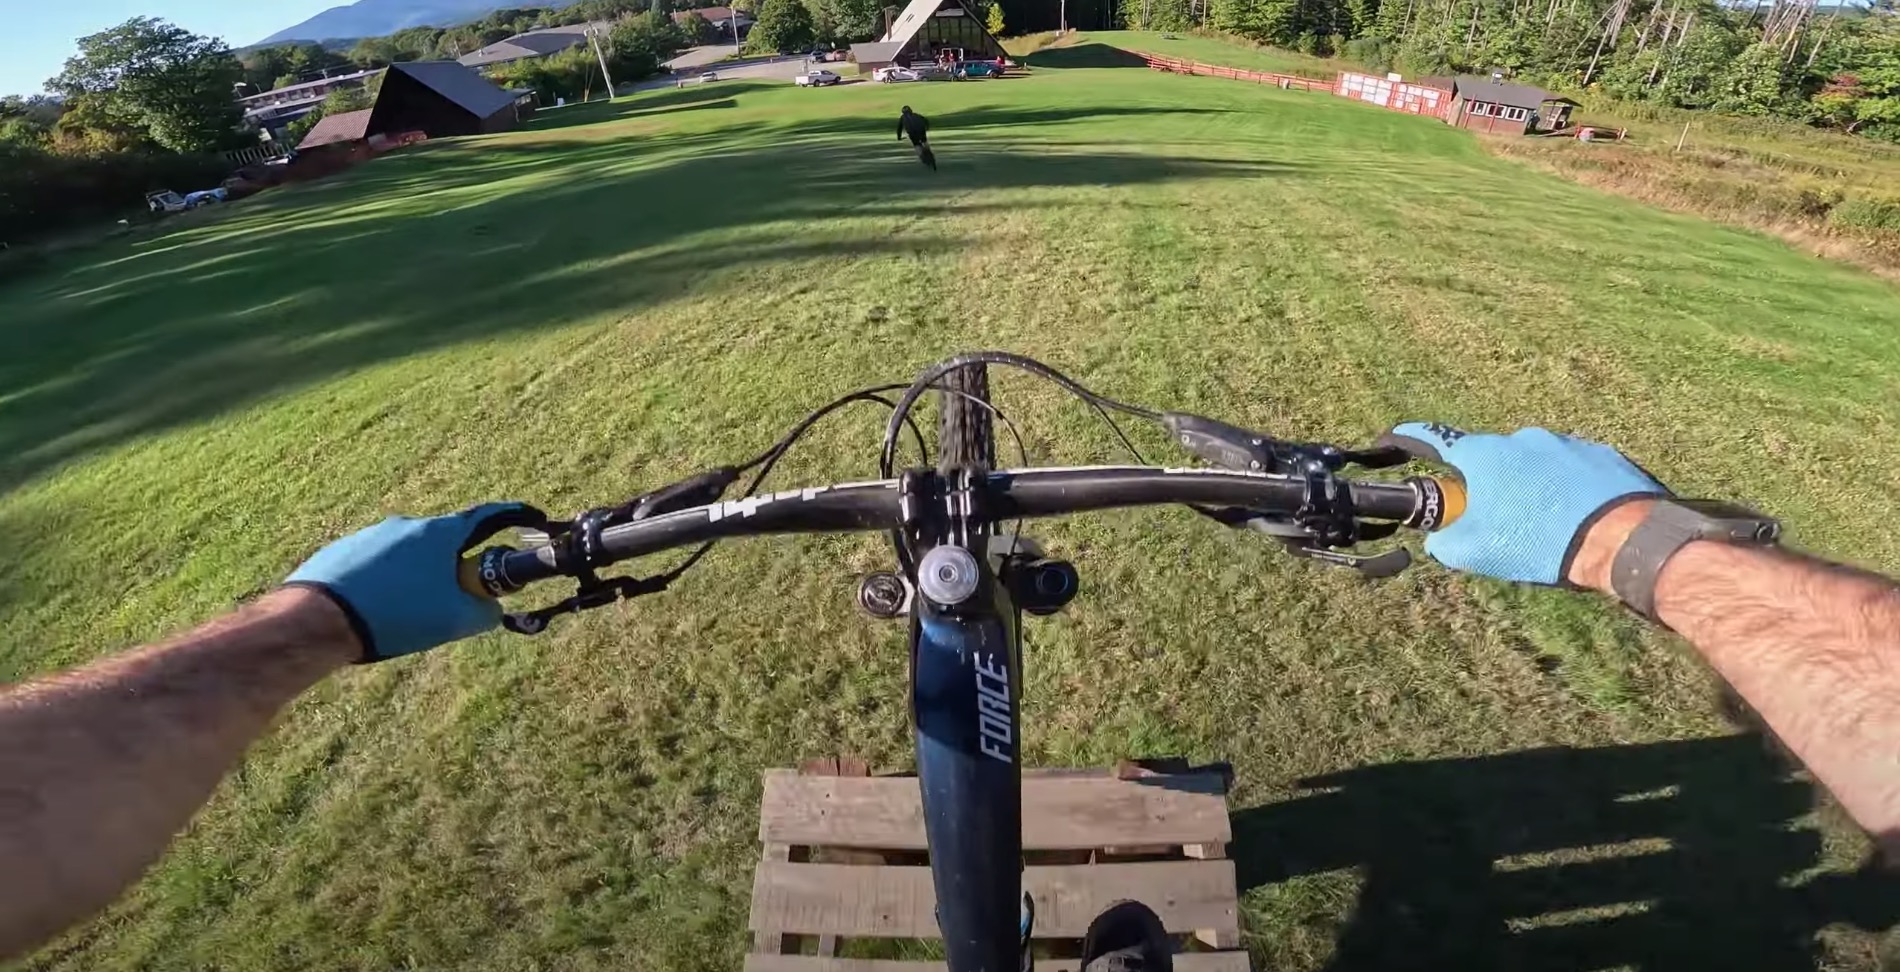 WATCH: Mountain Biker Rides At A Partially Abandoned Ski Area